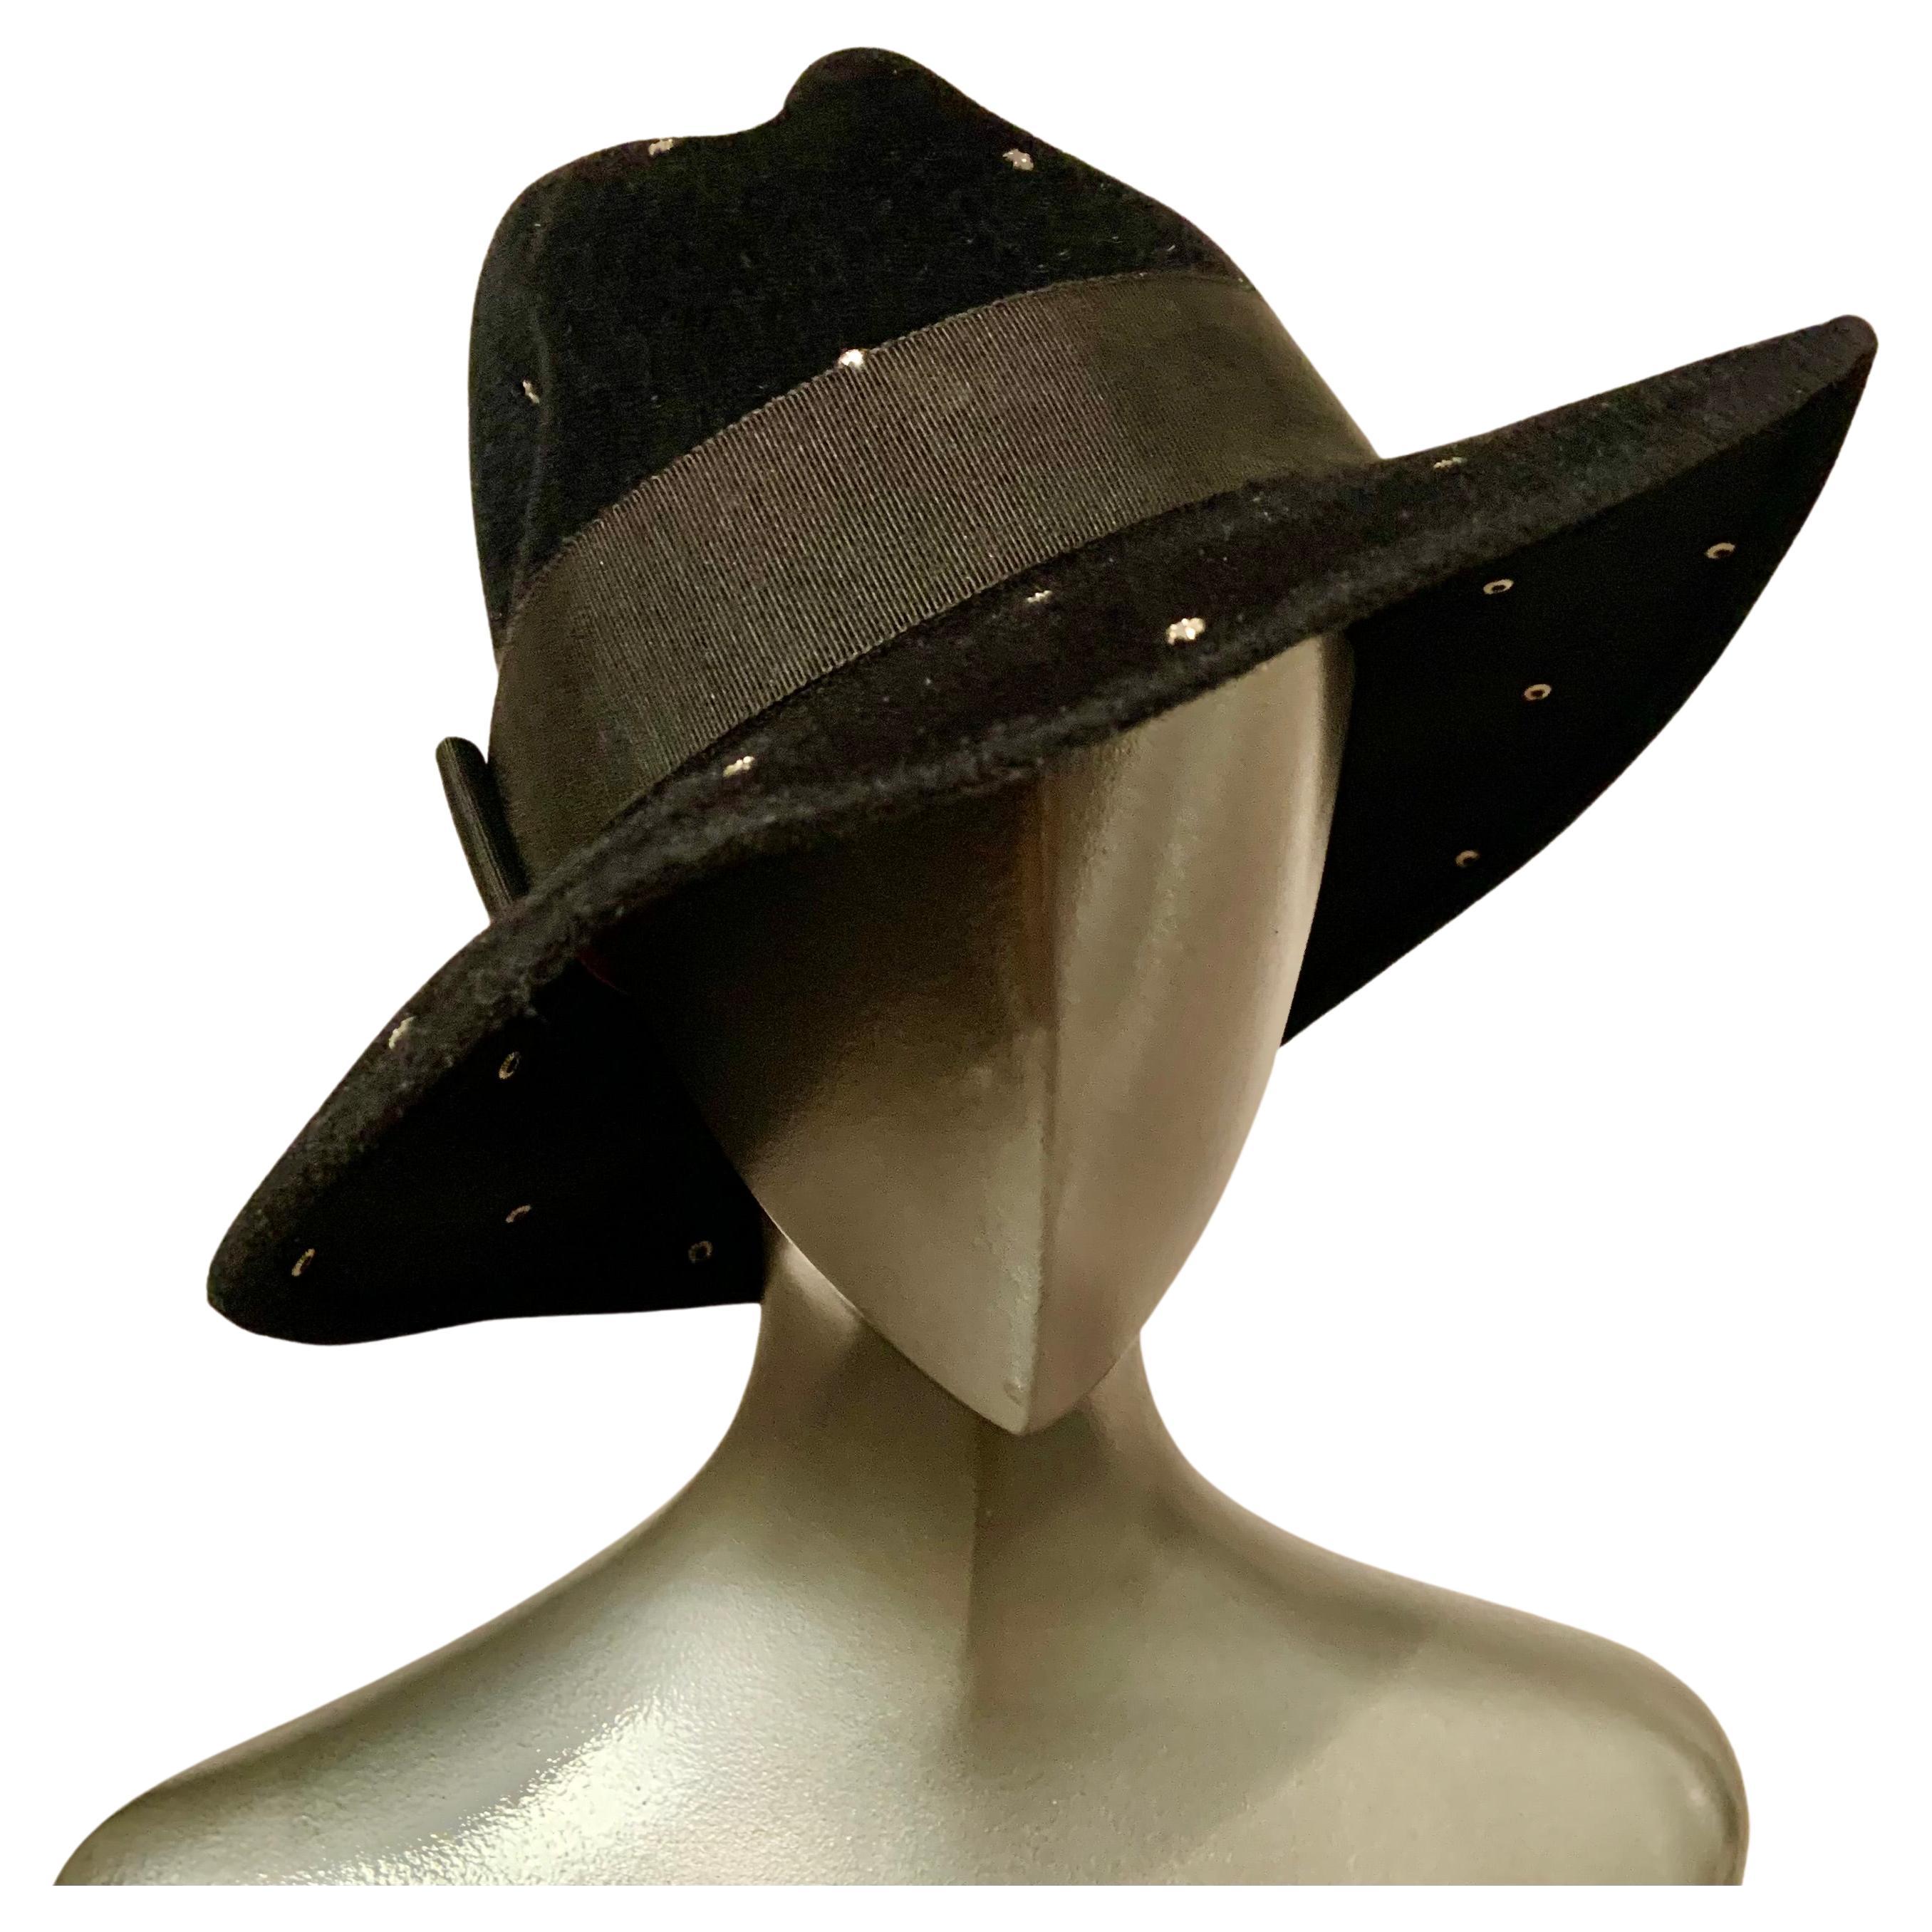 A very chic black wool fedora is studded with rhinestones which add a dash of glamour. The hat also has a black grosgrain ribbon hat band with a flat bow.  It is in excellent condition and the interior circumference is 22